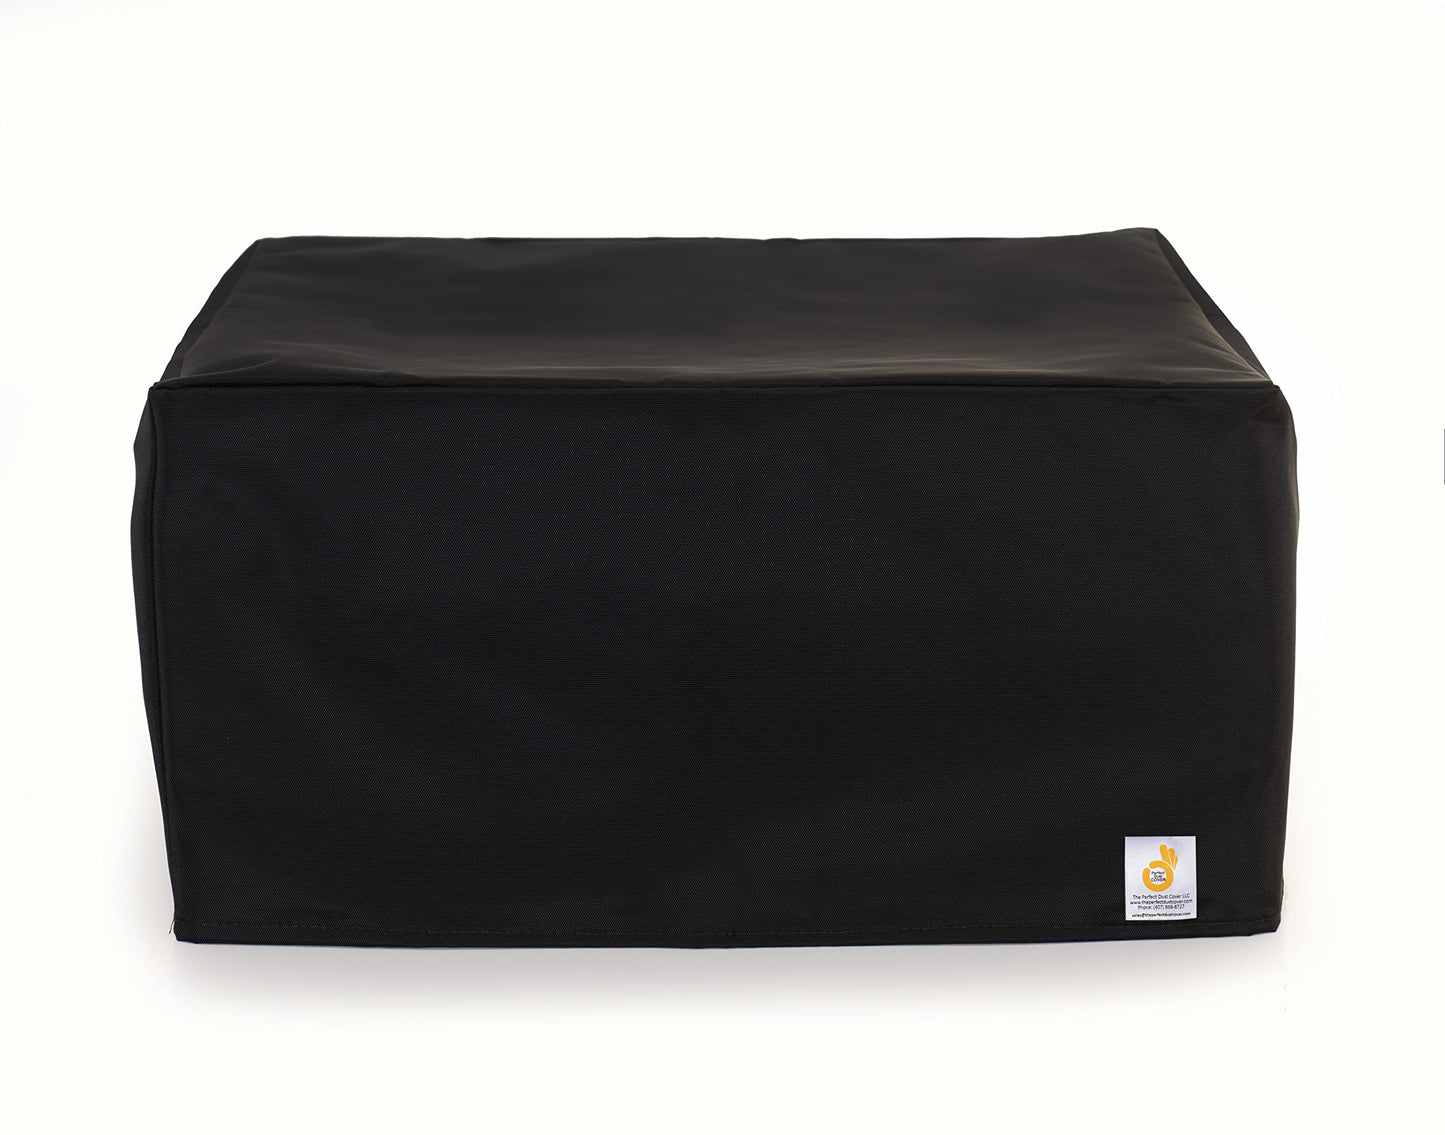 The Perfect Dust Cover, Black Nylon Cover for Epson Workforce Pro WF-7840 Wireless Wide Format All-in-One Printer, Anti Static, Double-Stitched and Waterproof Cover by The Perfect Dust Cover LLC